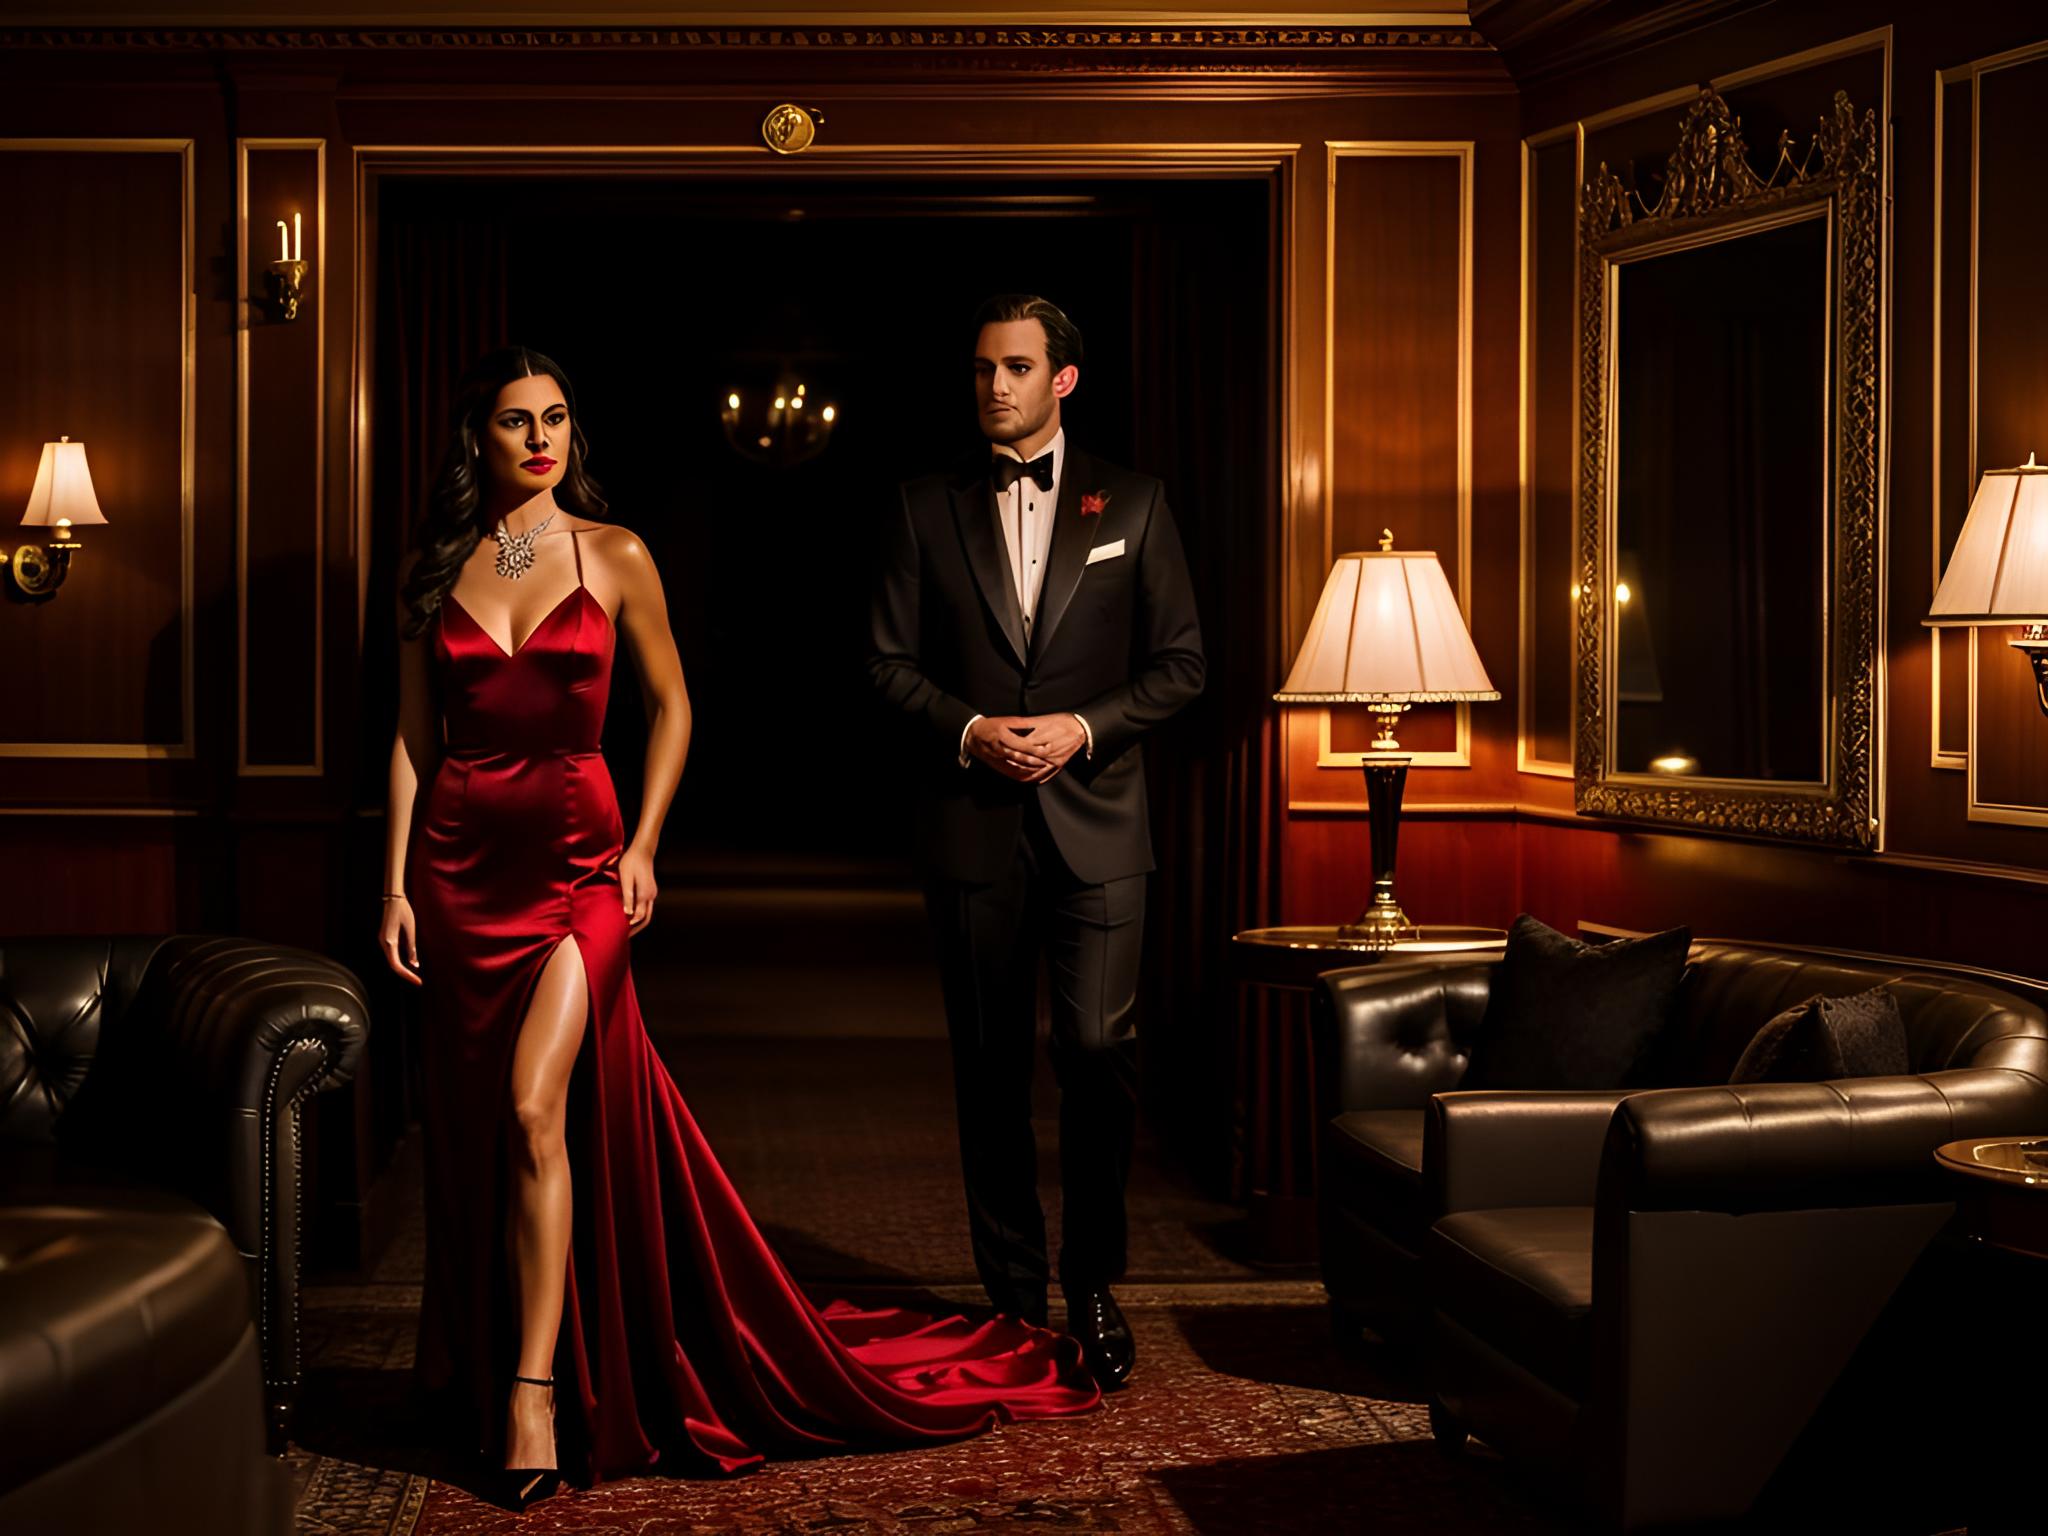 In the dimly lit, opulent lounge of the secret club hidden within the luxurious swingers cruise, a confident woman in a red satin gown, adorned with a diamond choker, locks eyes with a mysterious, cloaked figure in the corner, as her partner, the stag, watches intently, the anticipation and tension palpable, as the couple contemplates the figure's offer to indulge in a world of dark, twisted pleasure, which could either destroy or enhance their relationship.